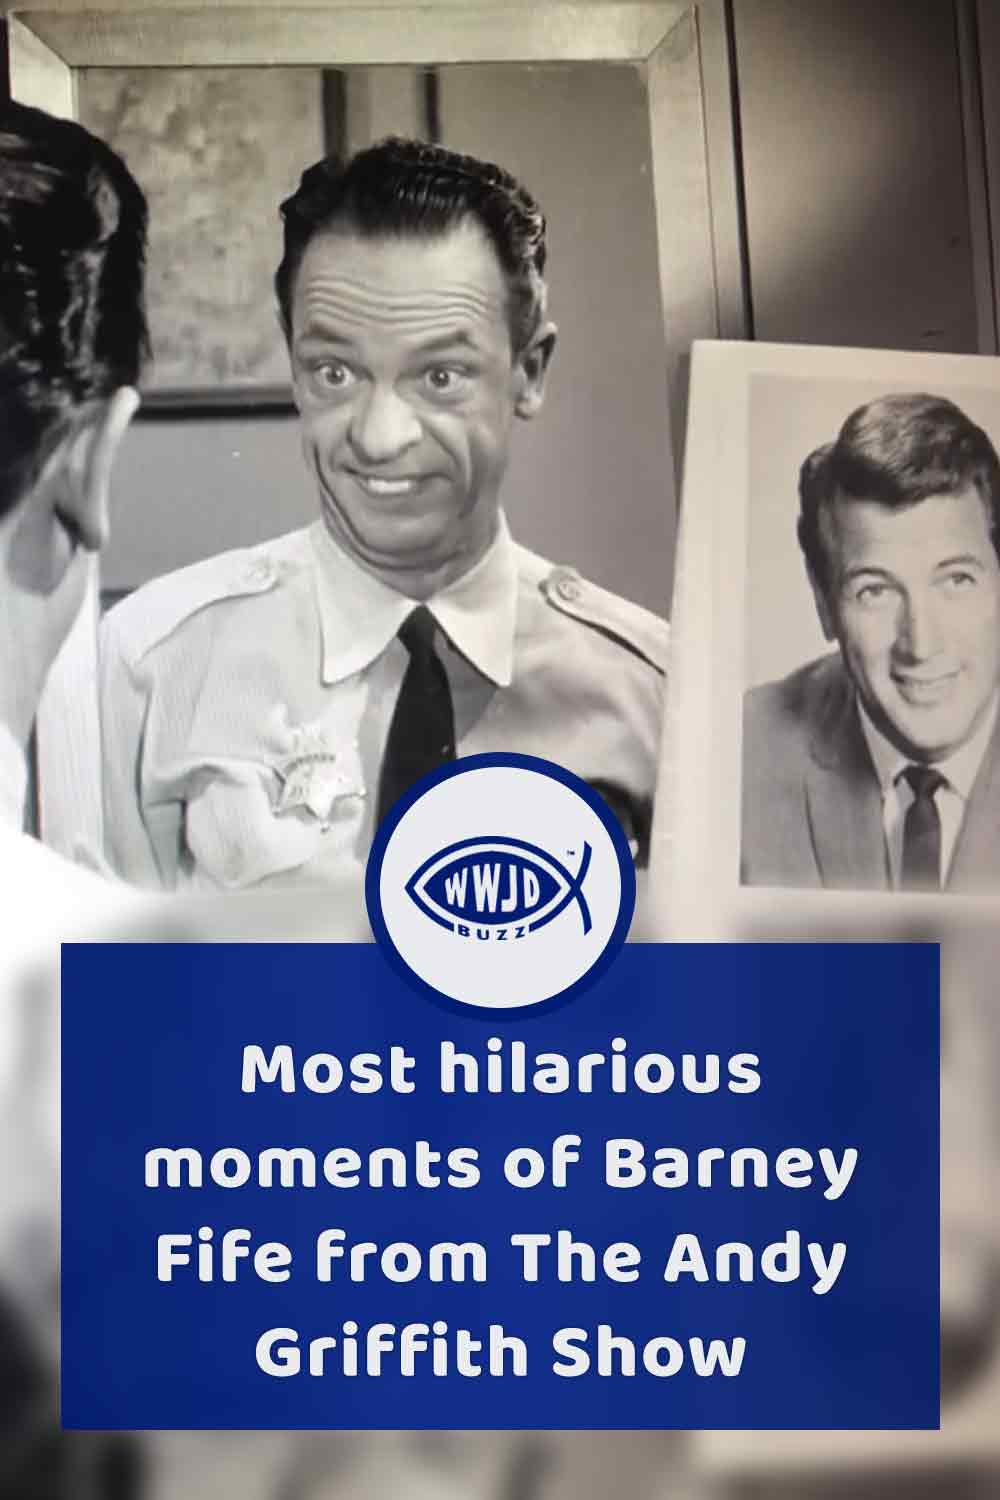 Most hilarious moments of Barney Fife from The Andy Griffith Show